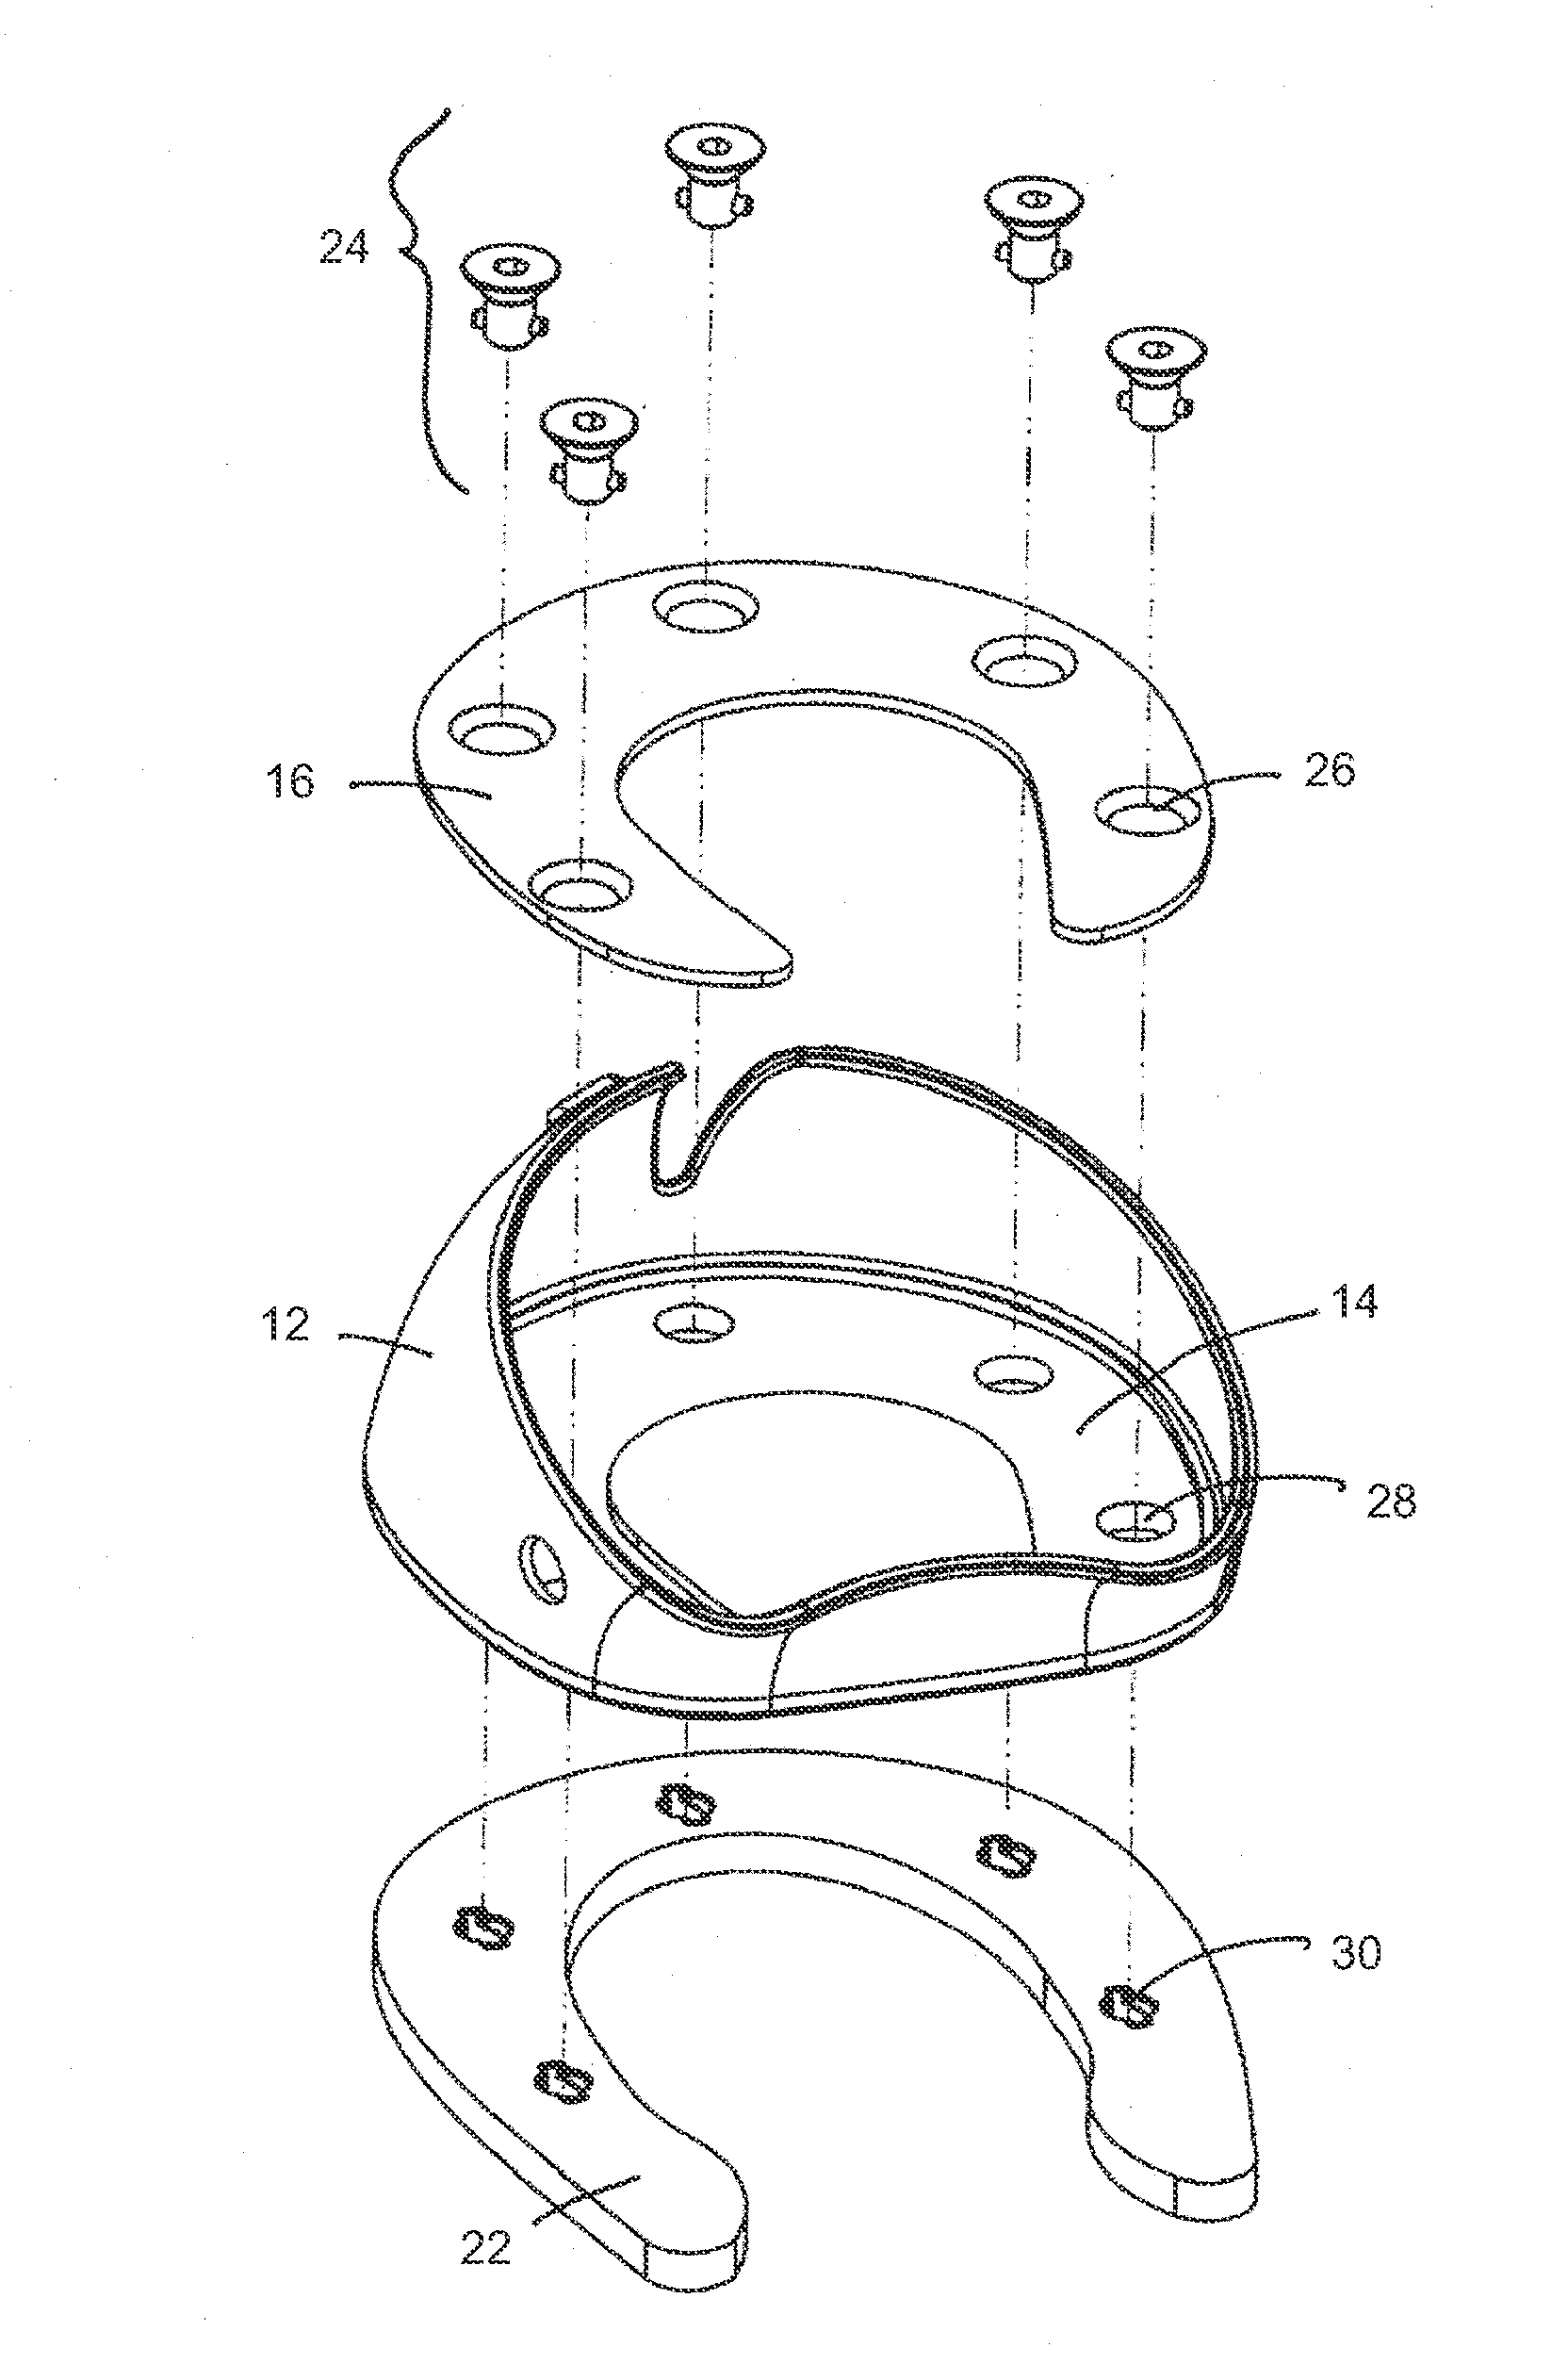 Horse hoof protective devices and related methods